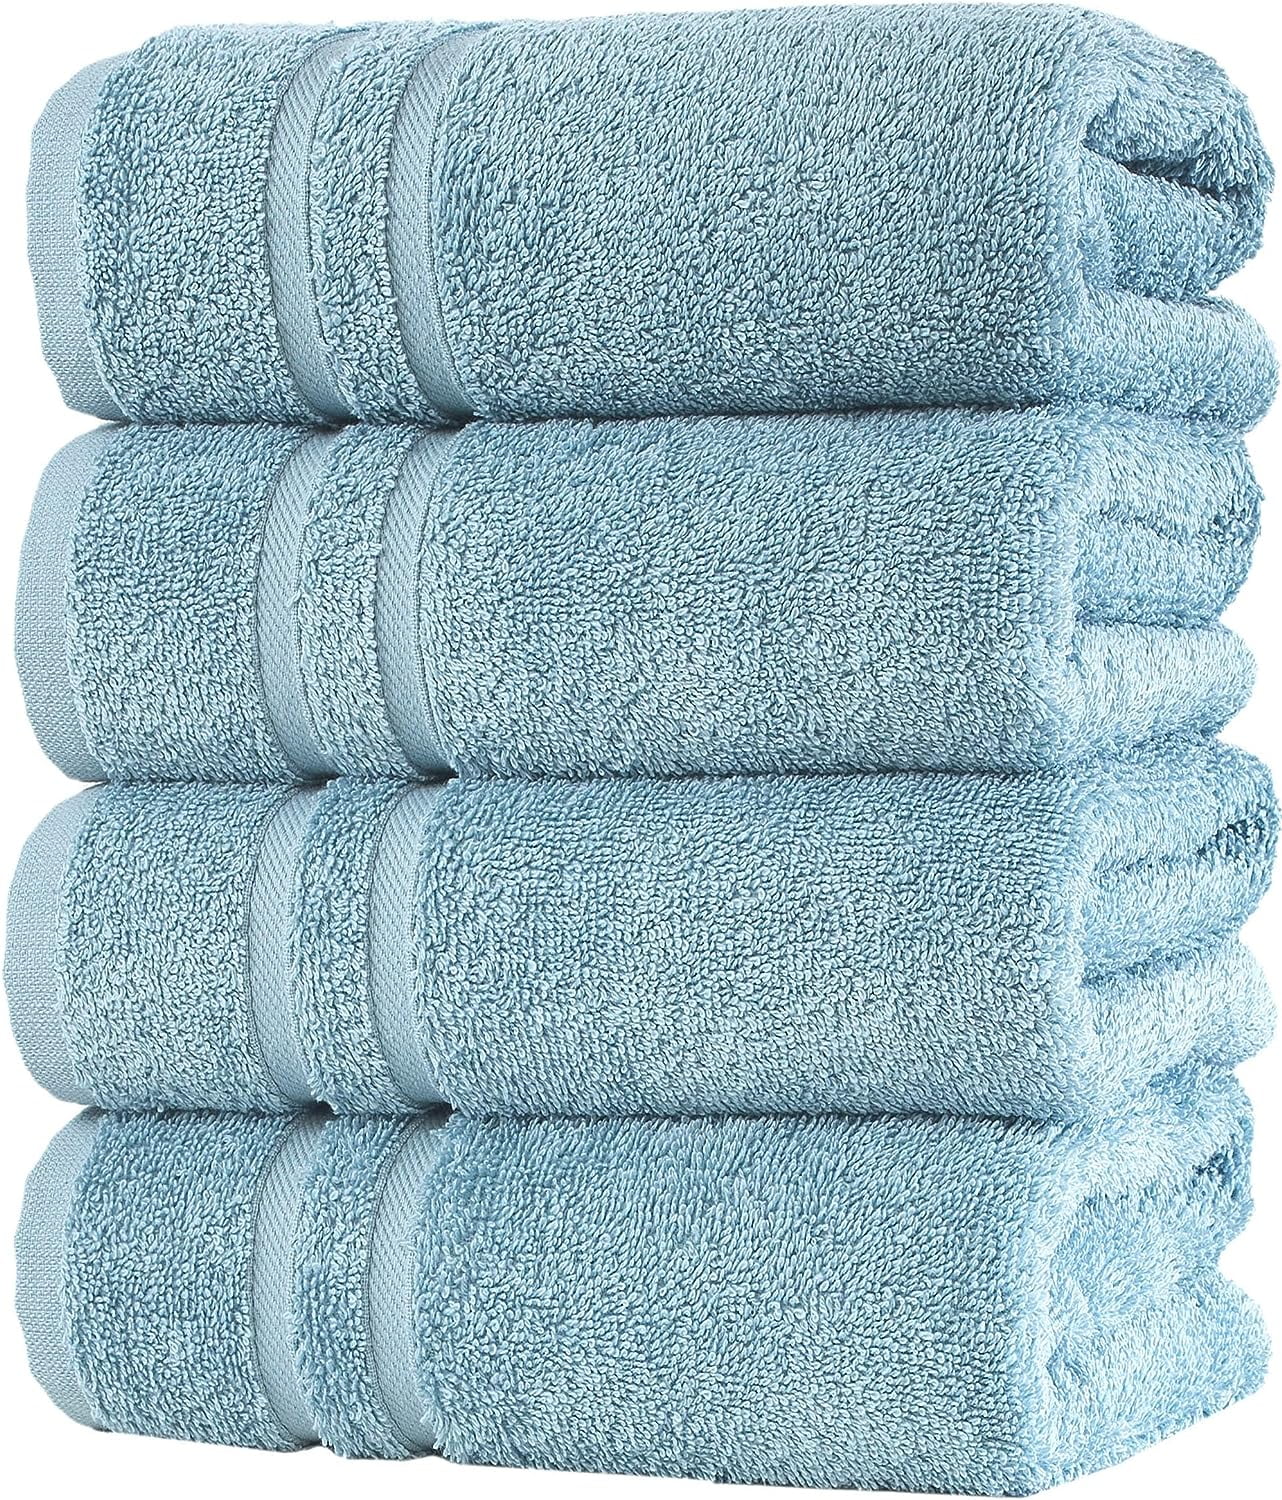 Hammam Linen Black Hand Towels 4-Pack - 16 x 29 Turkish Cotton Premium  Quality Soft and Absorbent Small Towels for Bathroom - Yahoo Shopping